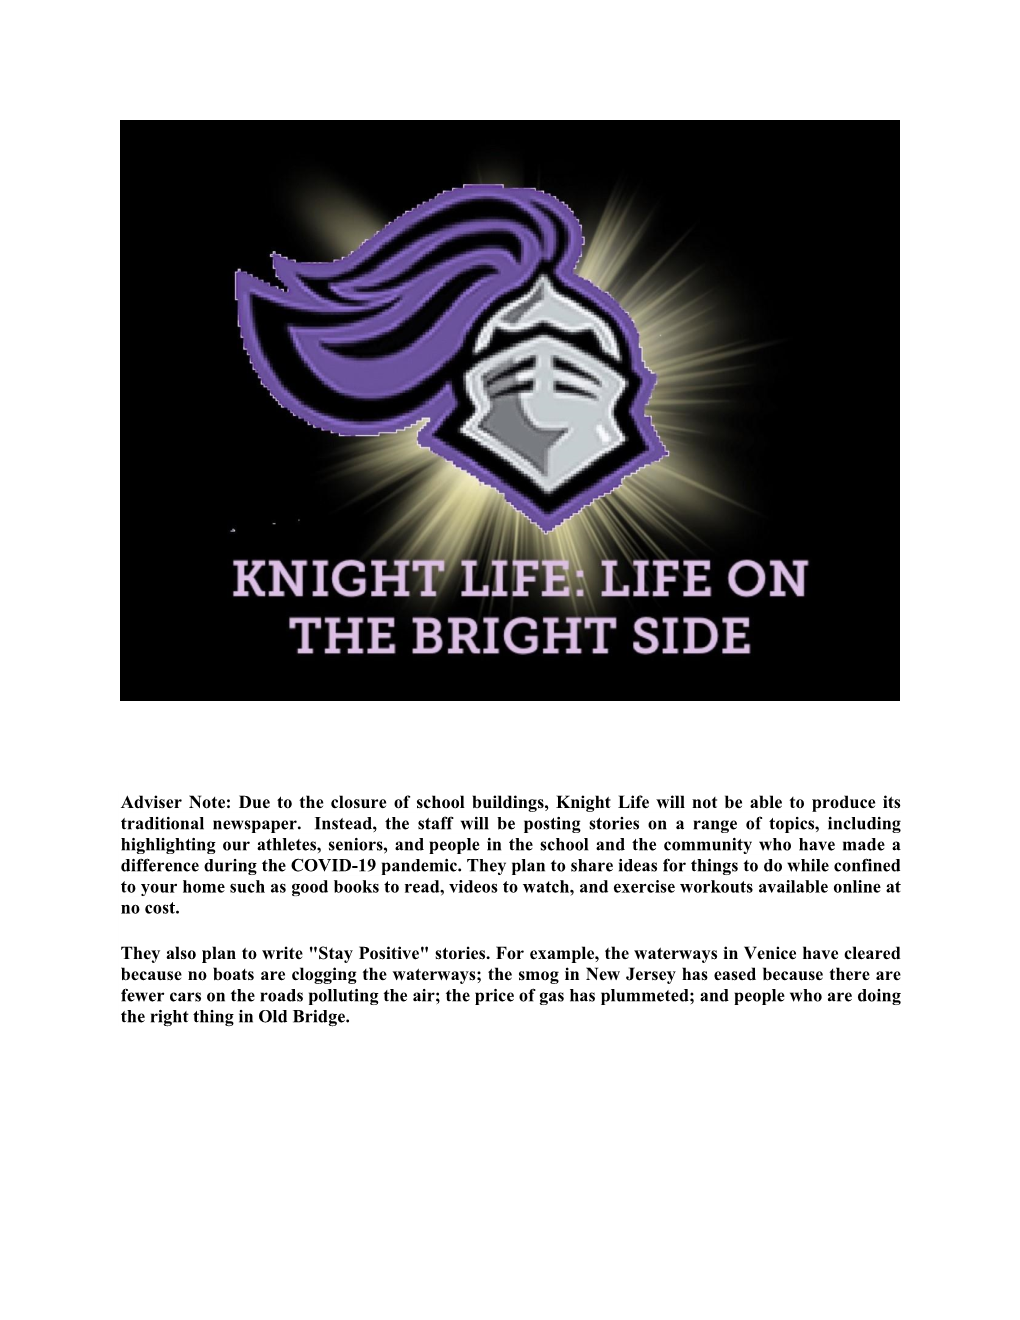 Due to the Closure of School Buildings, Knight Life Will Not Be Able to Produce Its Traditional Newspaper